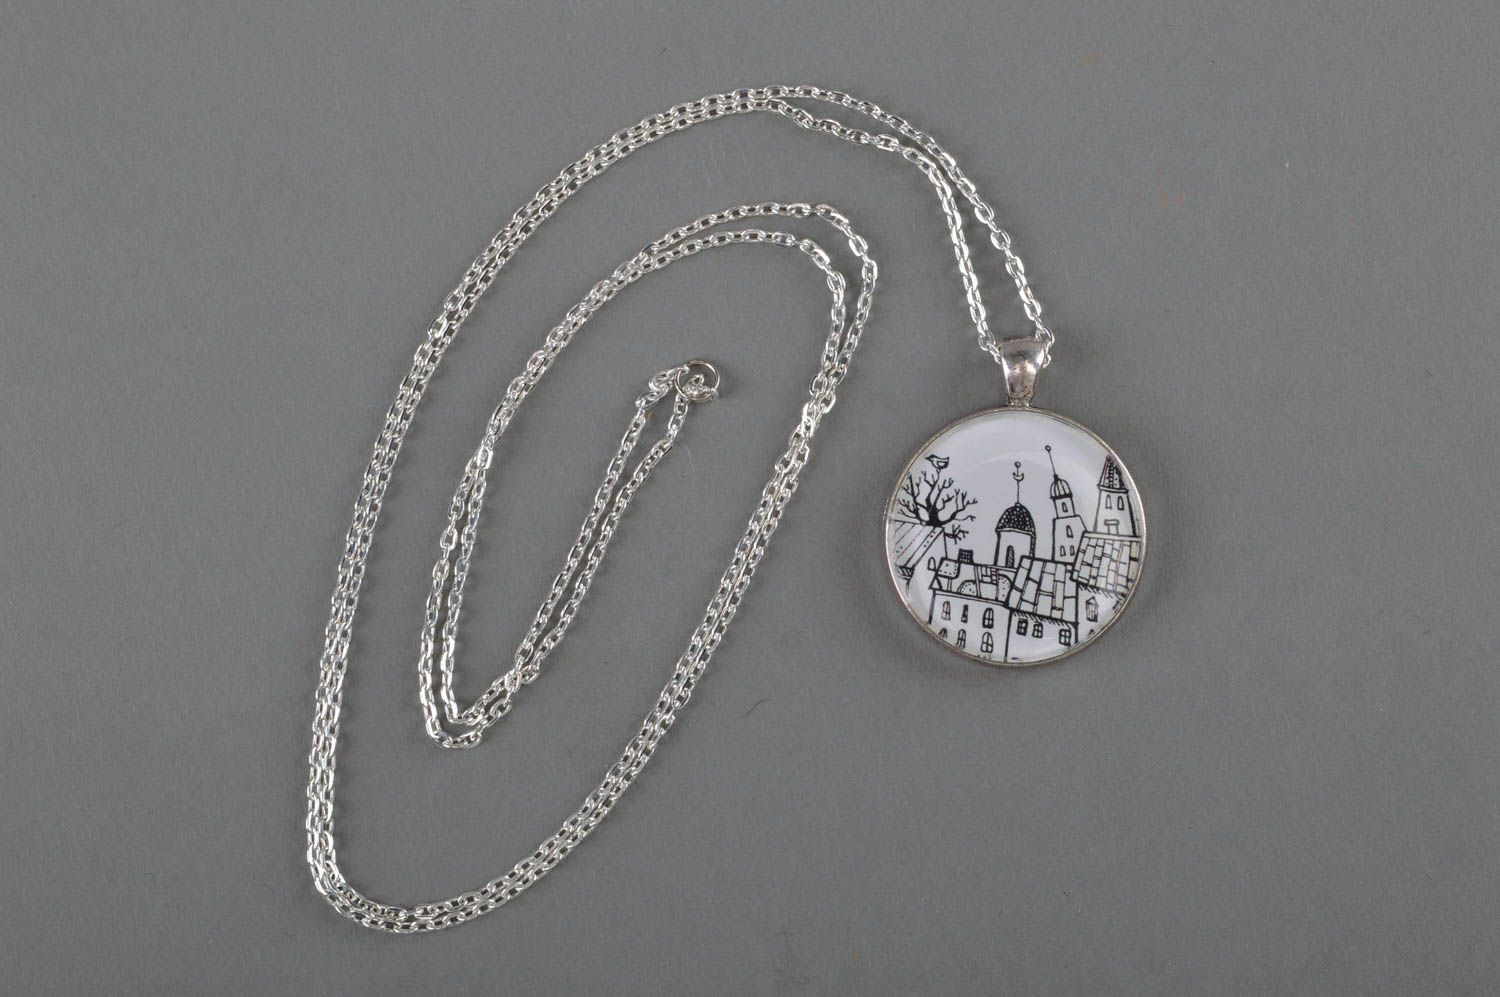 Handmade round decoupage pendant necklace with jewelry resin on metal chain photo 1